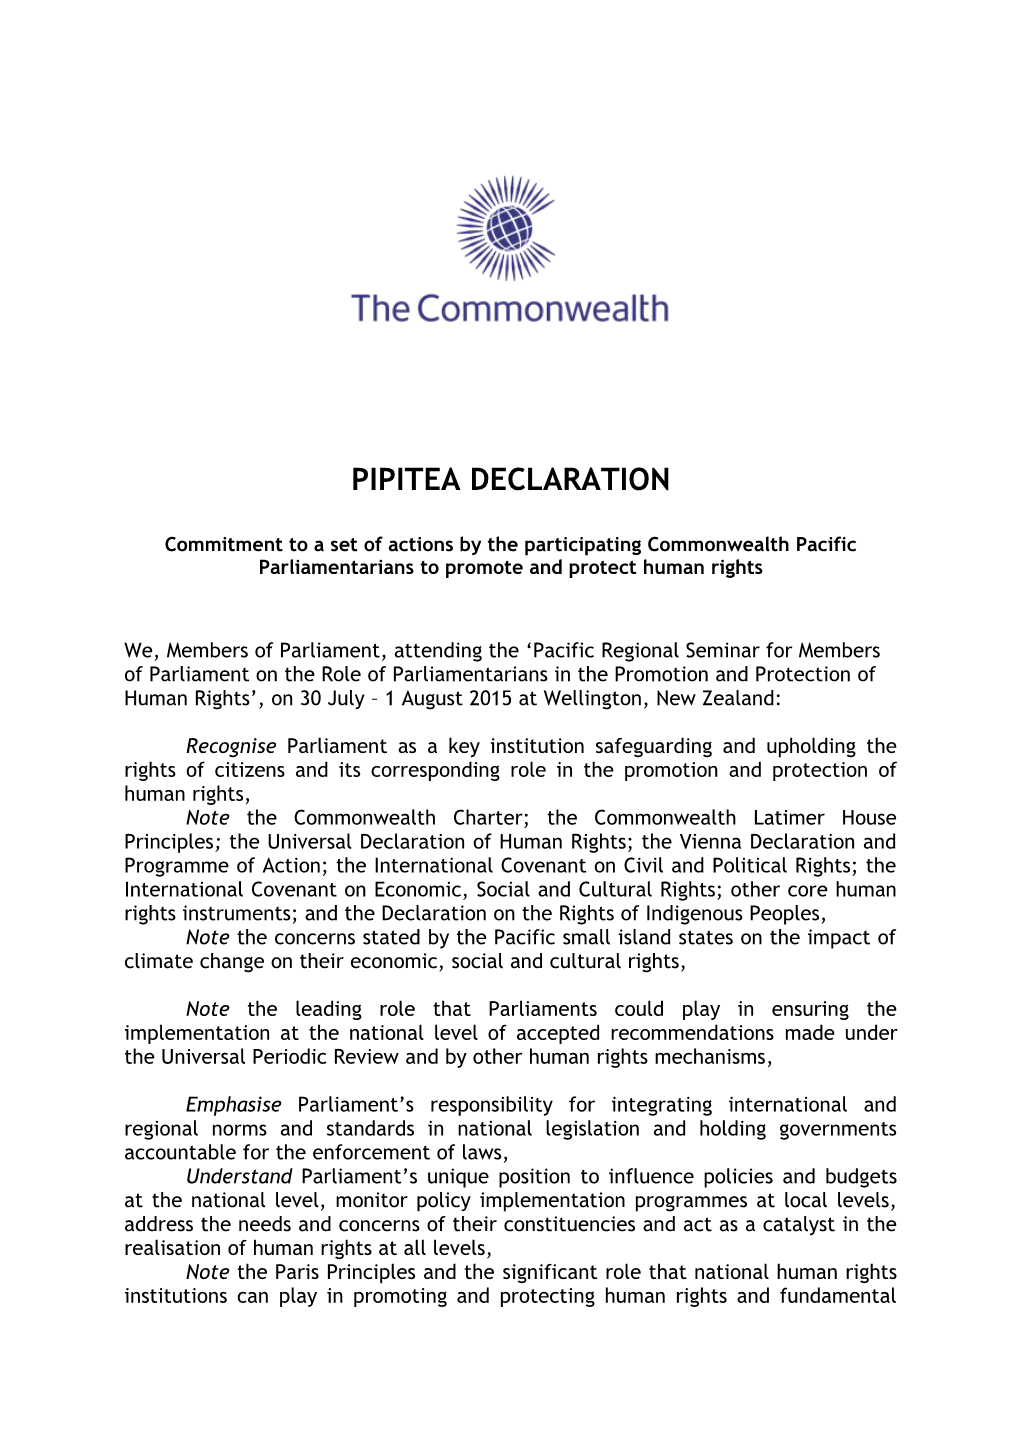 Commitment to a Set of Actions by the Participating Commonwealth Pacific Parliamentarians